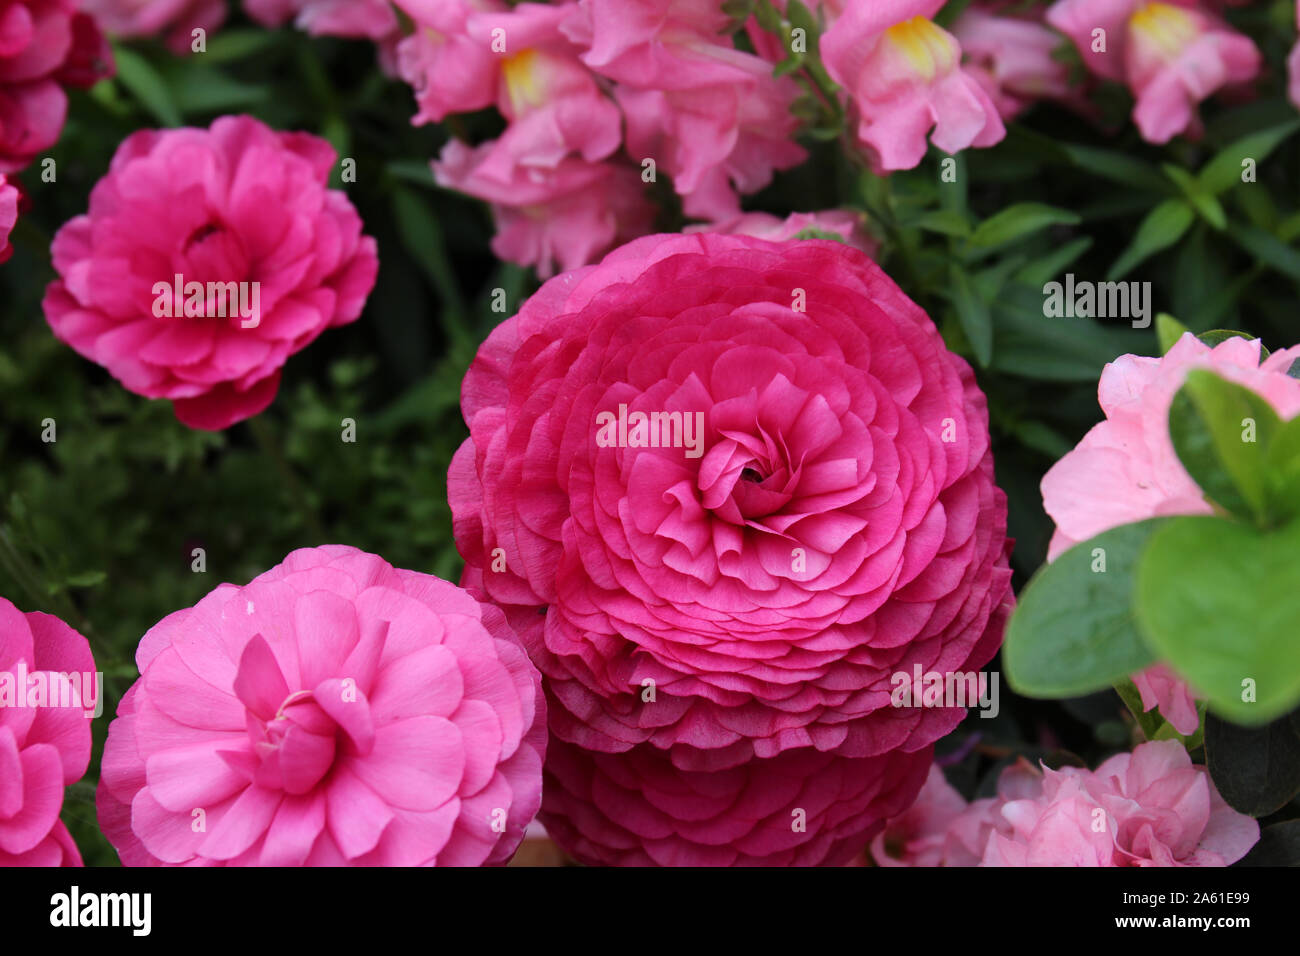 A Beautiful Flower Bed Filled With Pink Ranunculus And Pink Snapdragon Flowers In Full Bloom Stock Photo Alamy